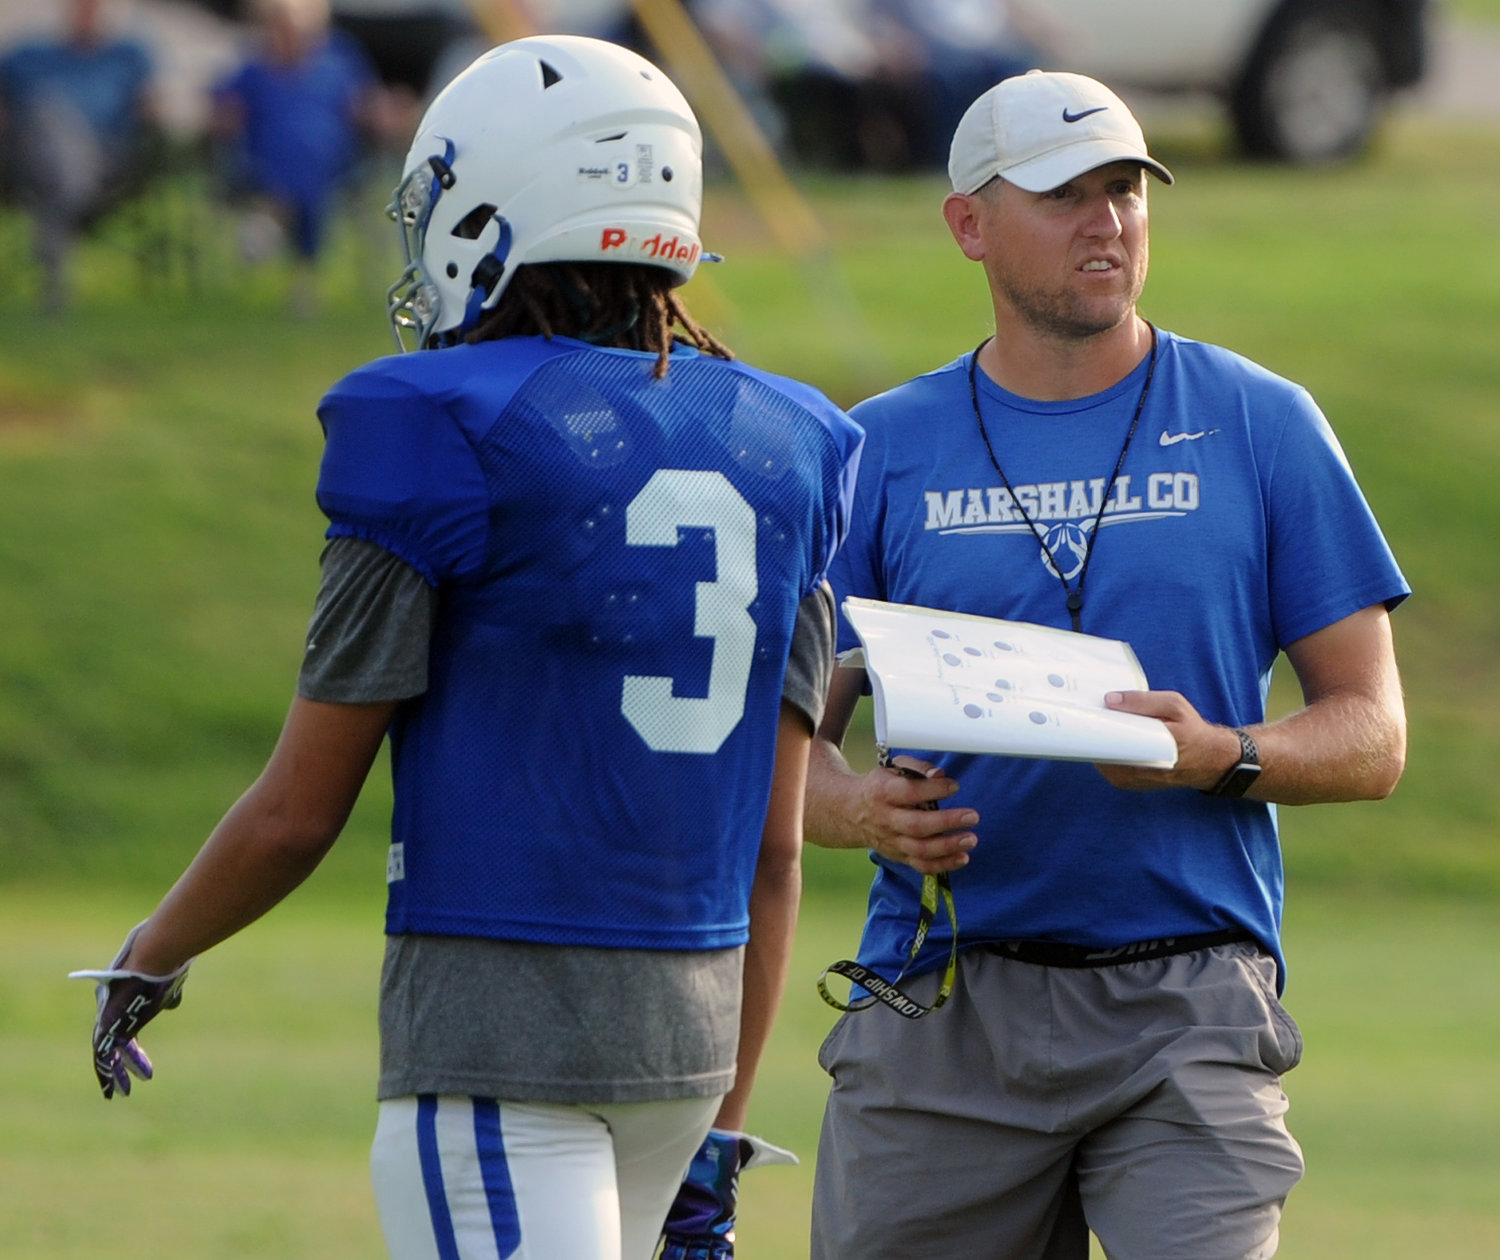 Coach Thomas Osteen gets the offense organized for the first Marshall County possession in the scrimmage.